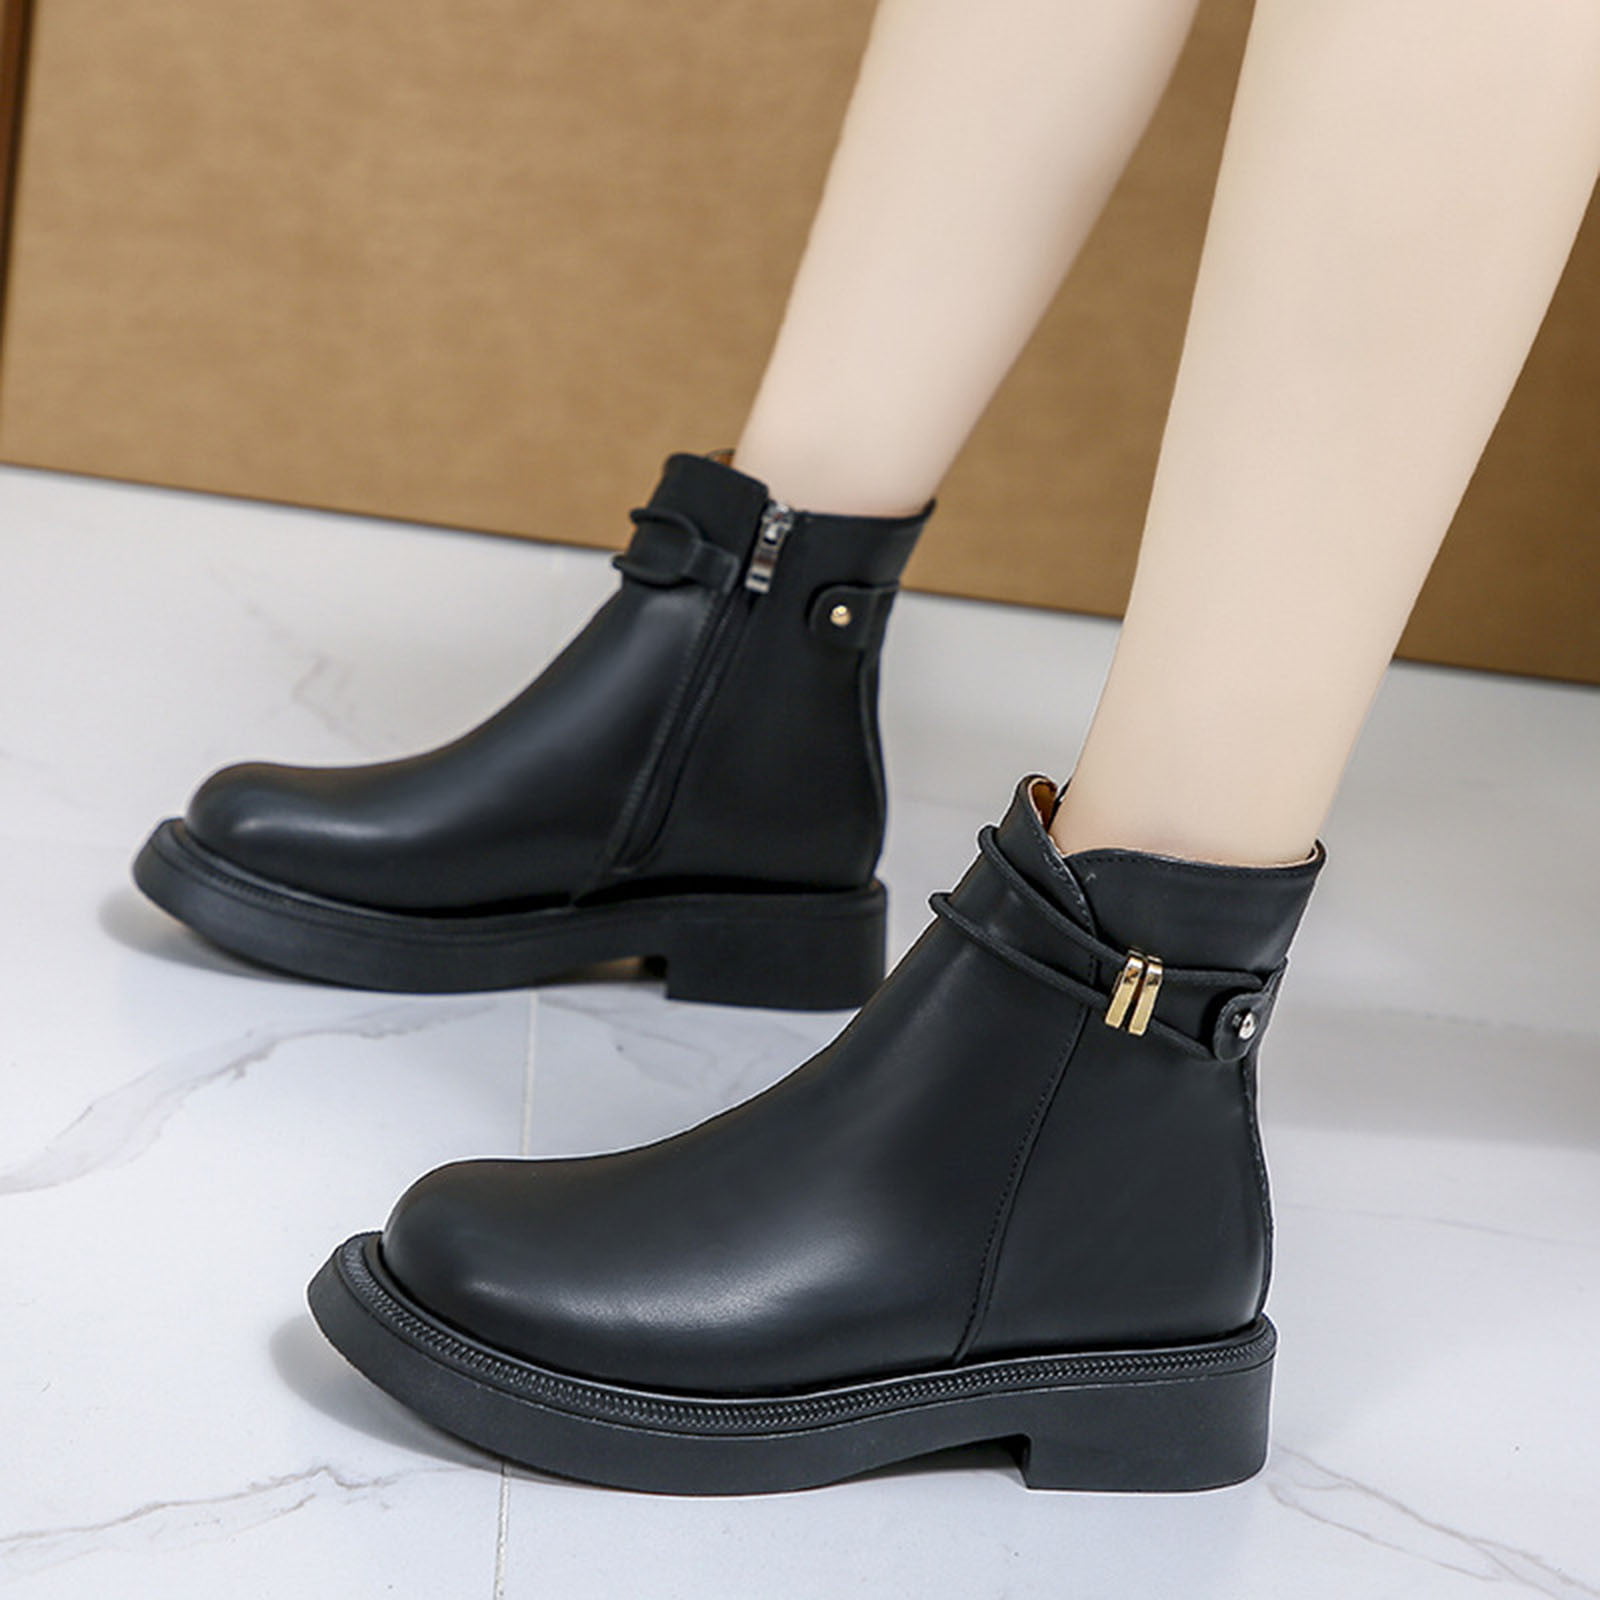  PU Knee High Boots Women Roman Style Chunky Heel Round Toe  Fashion Boots Fall Winter Leather Riding Booties 2022 : Clothing, Shoes 